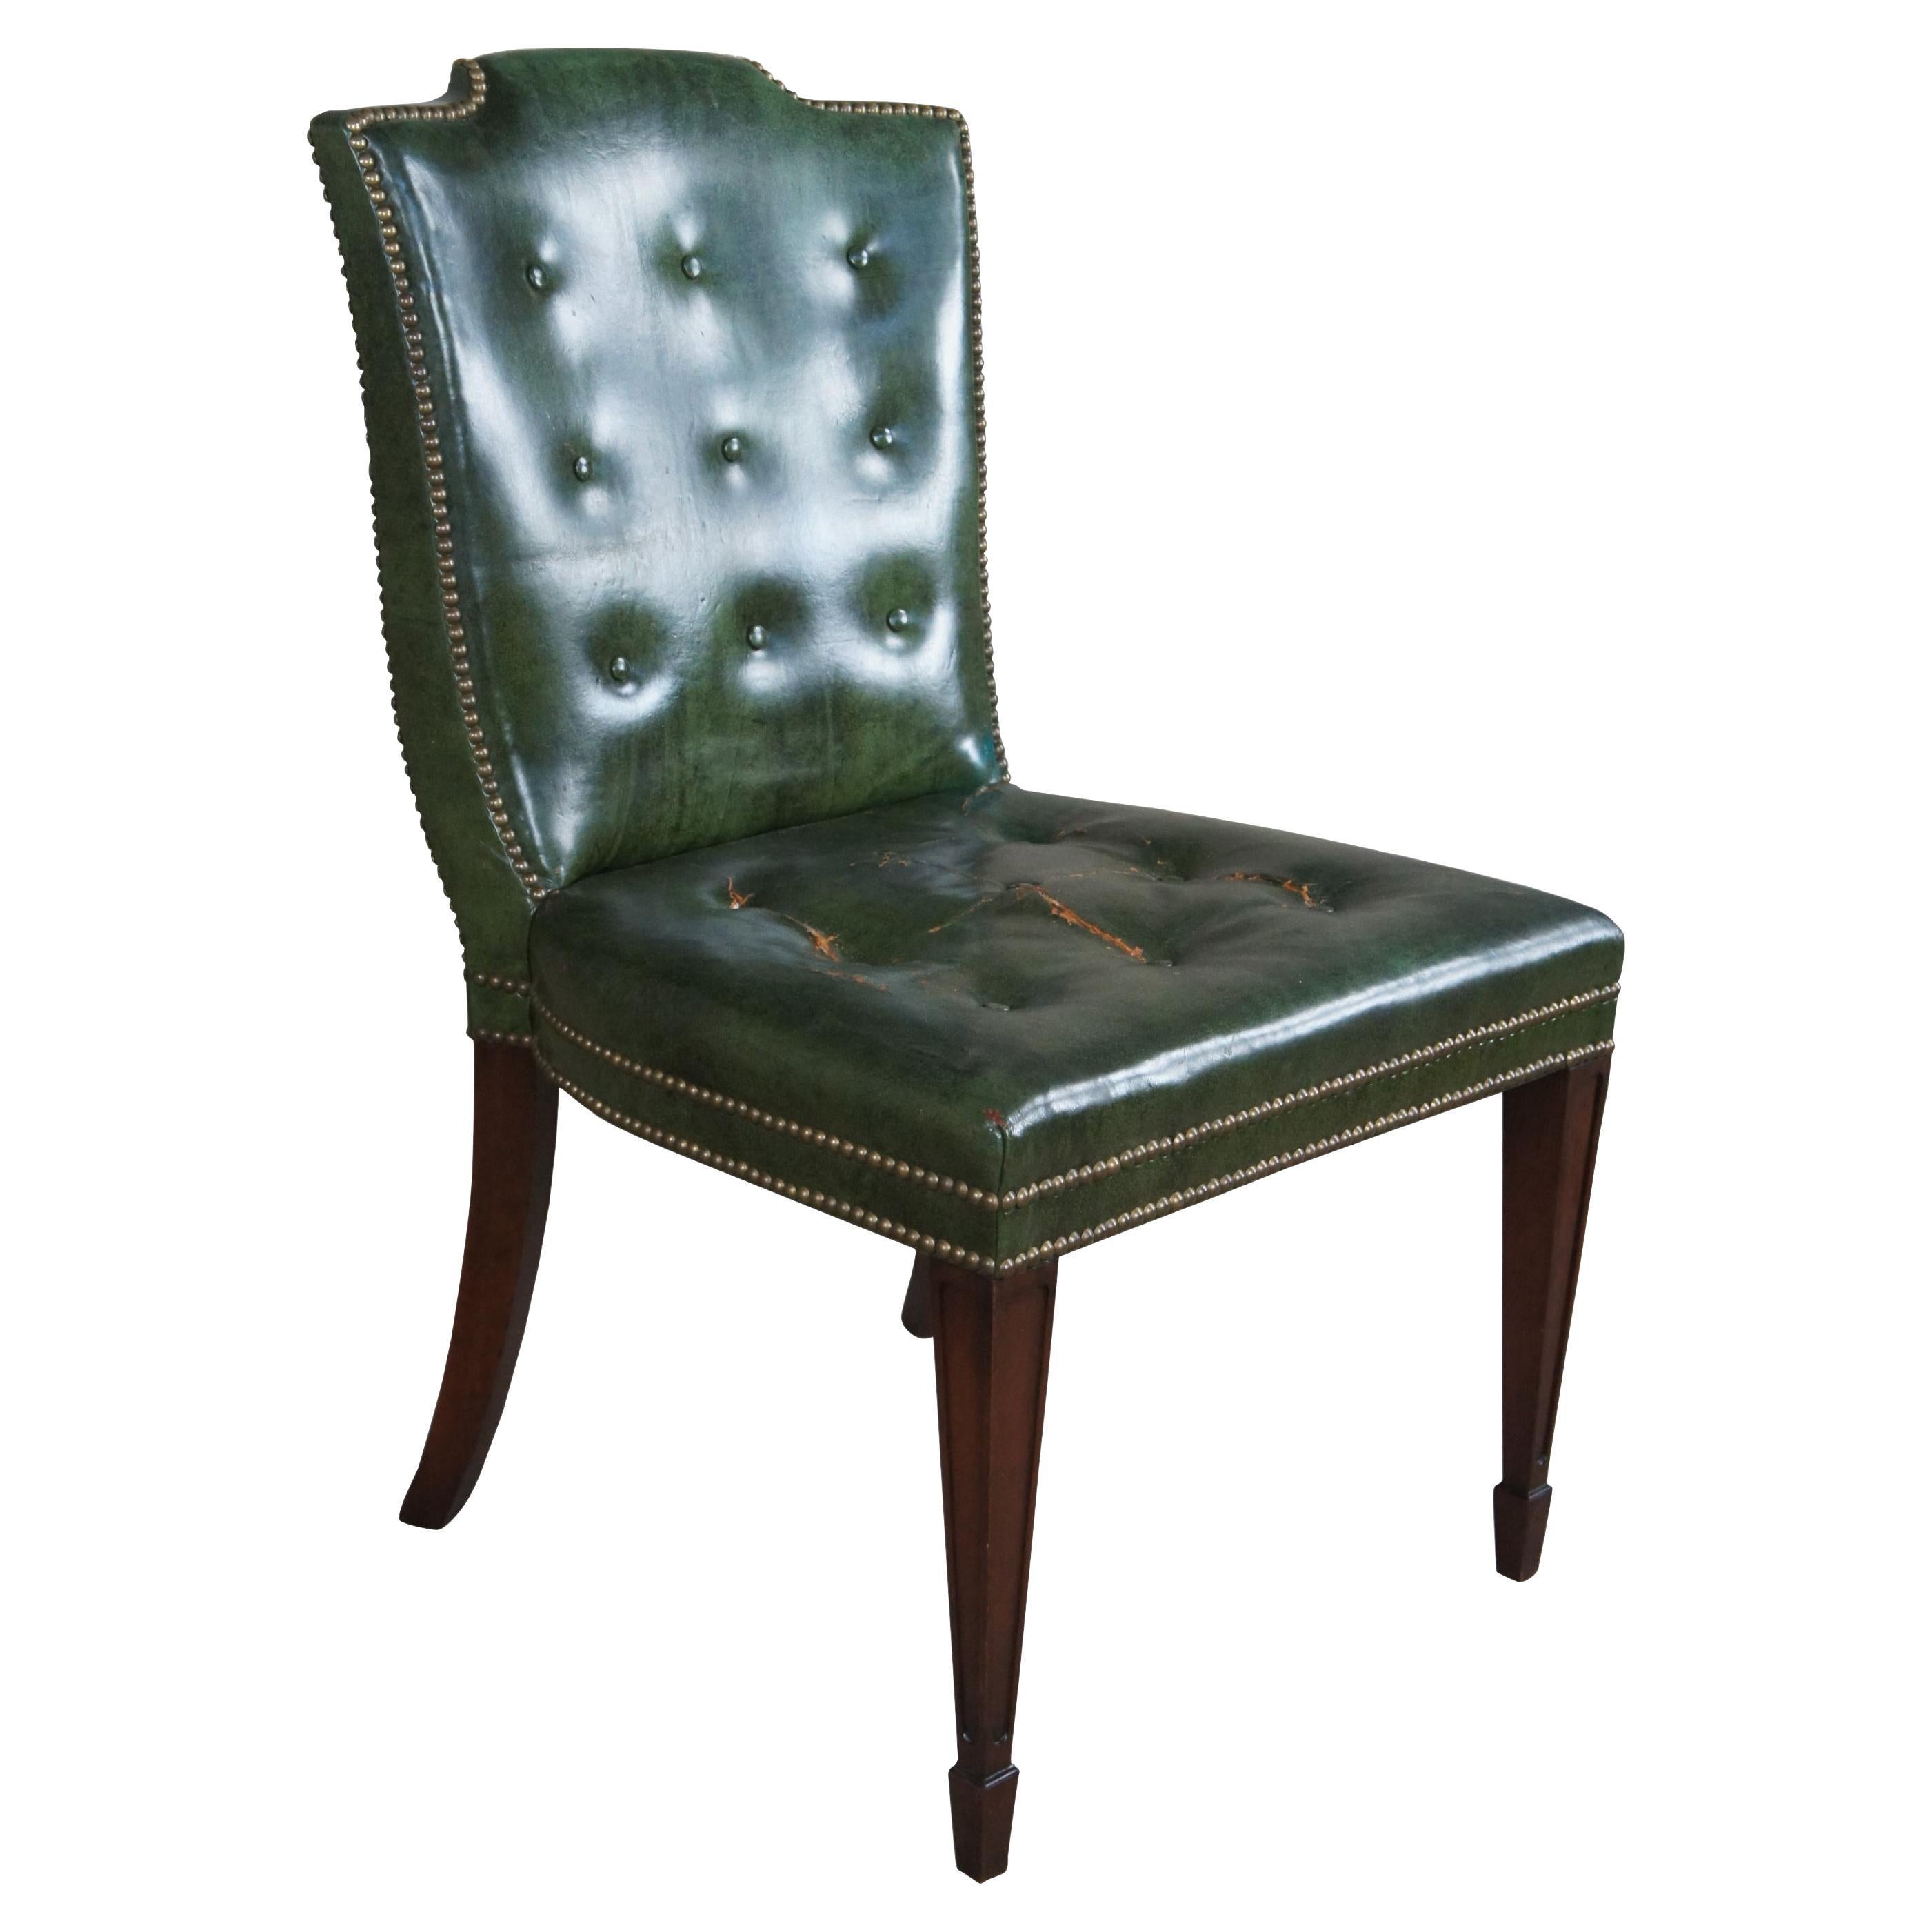 Drexel Heritage Midcentury Sheraton Mahogany Green Leather Tufted Side Chair